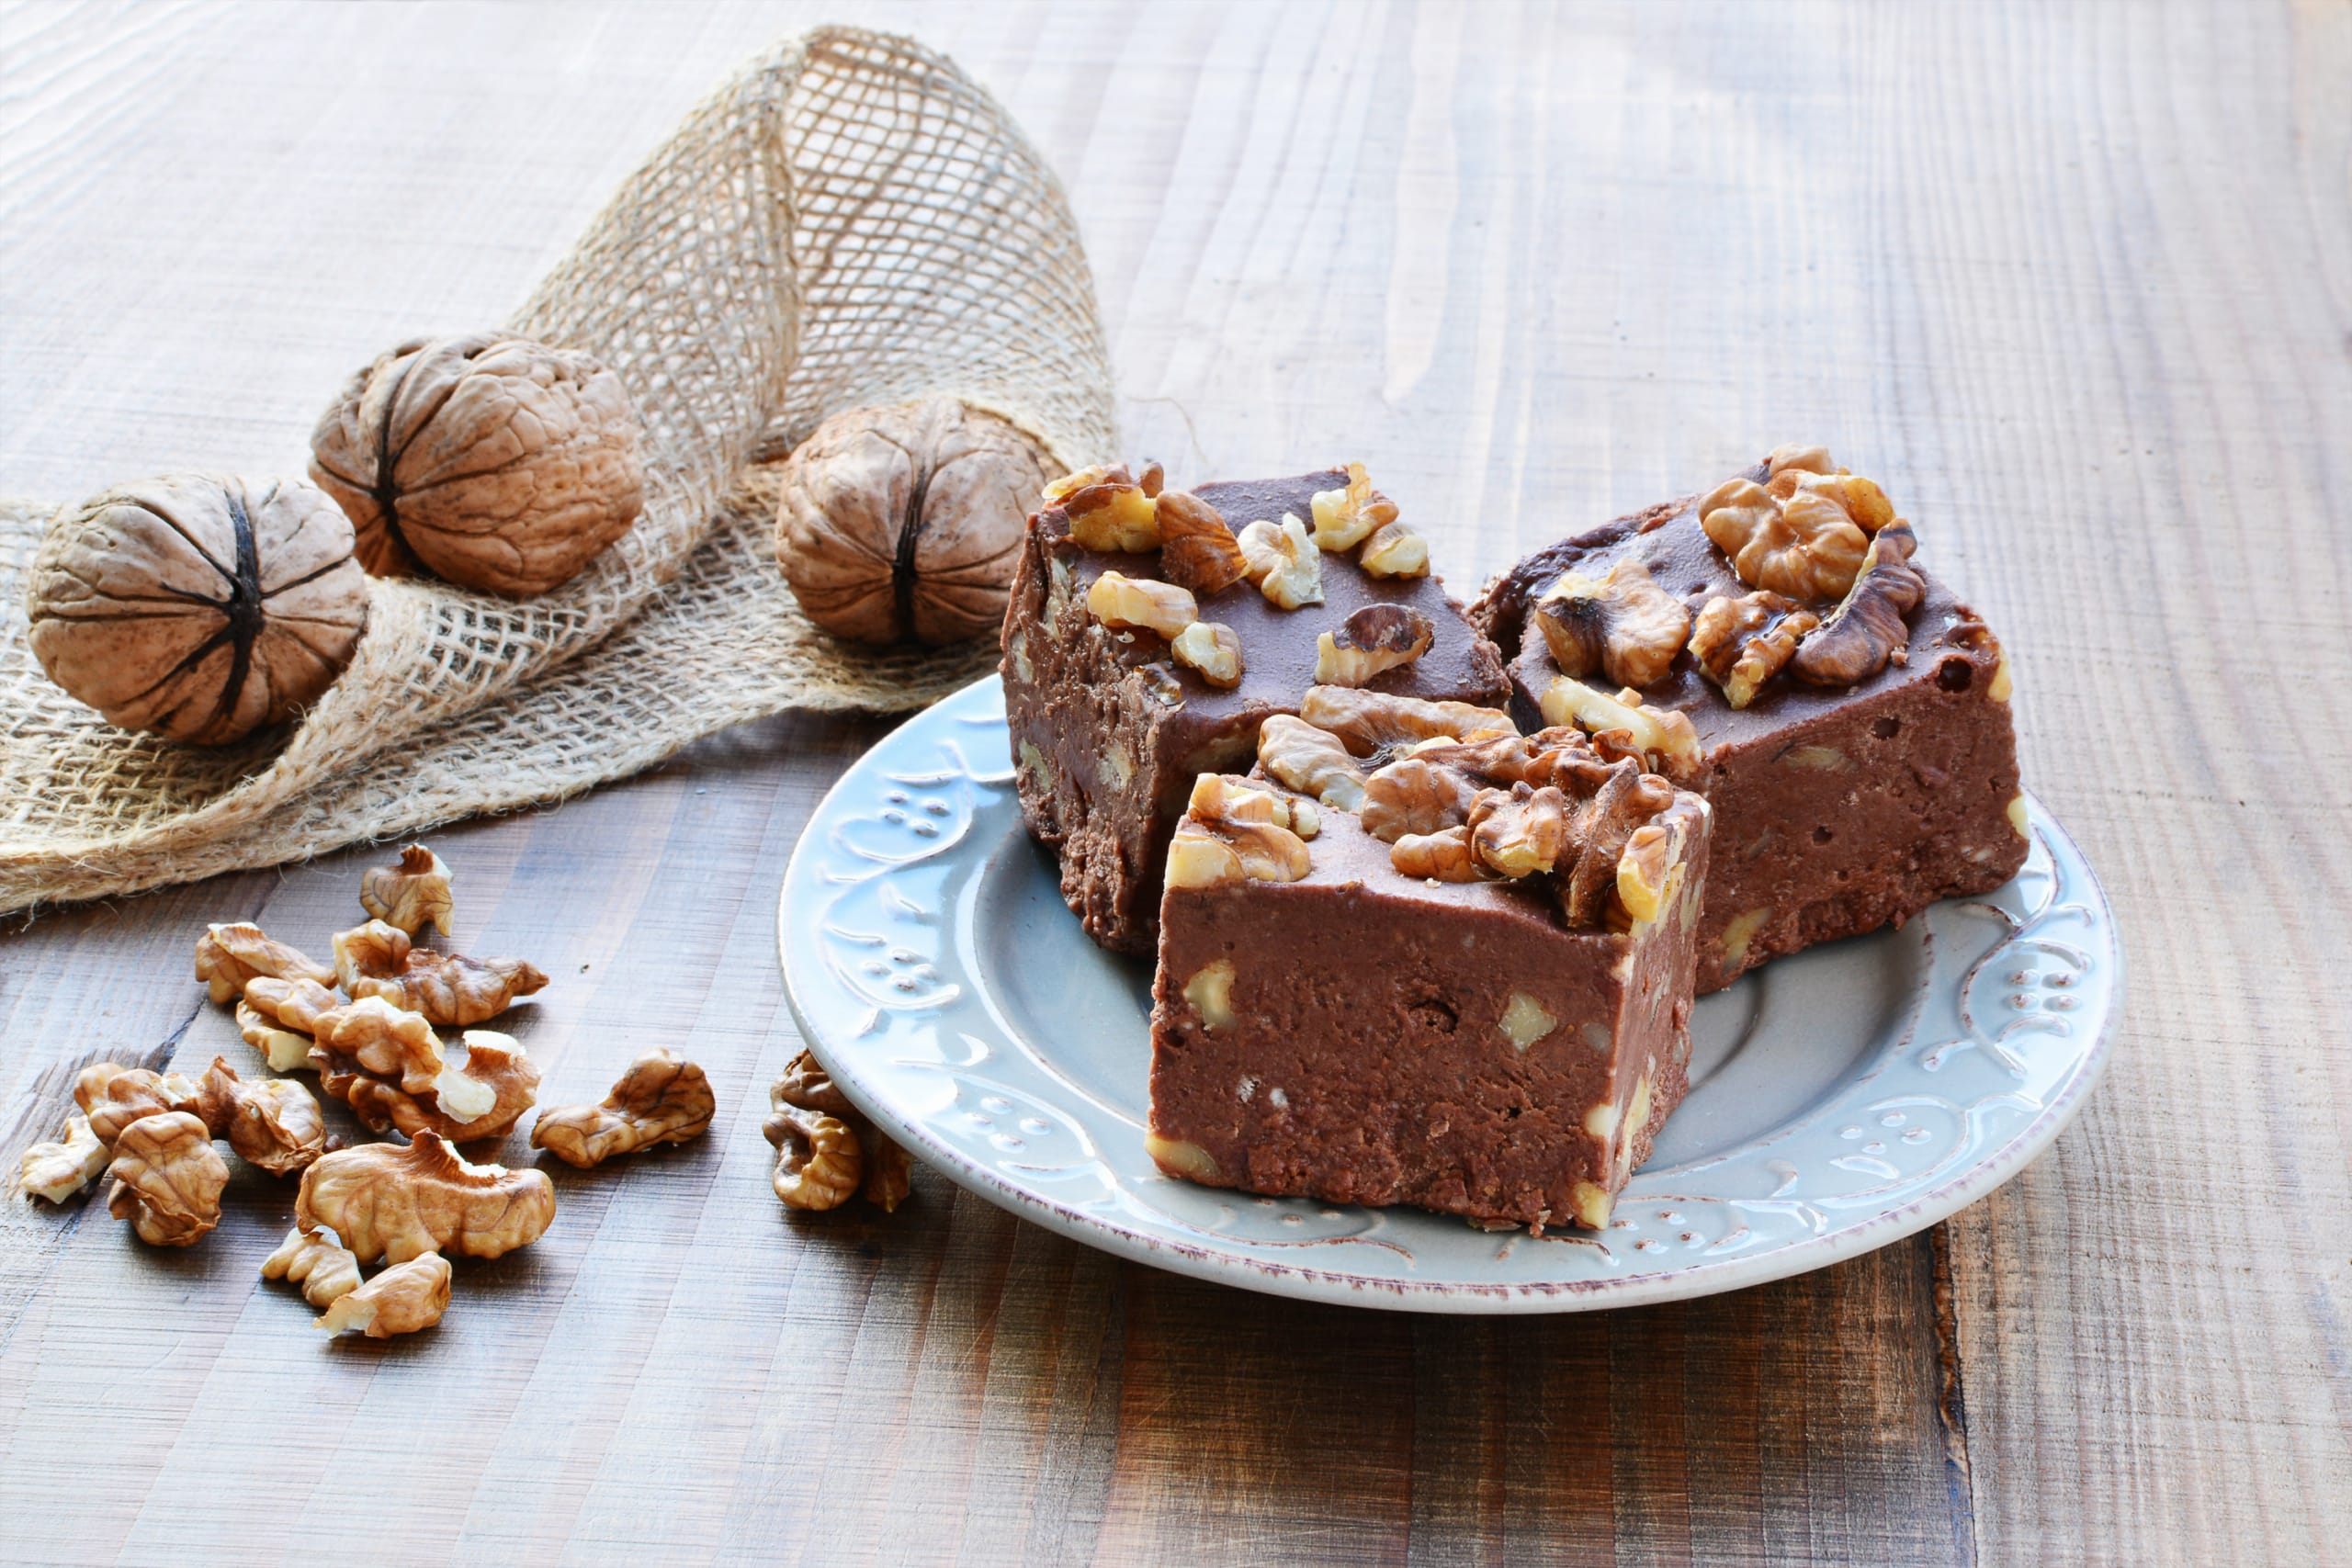 Three pieces of walnut fudge on a plate with bits of walnuts to the left and two whole nuts in the shell.